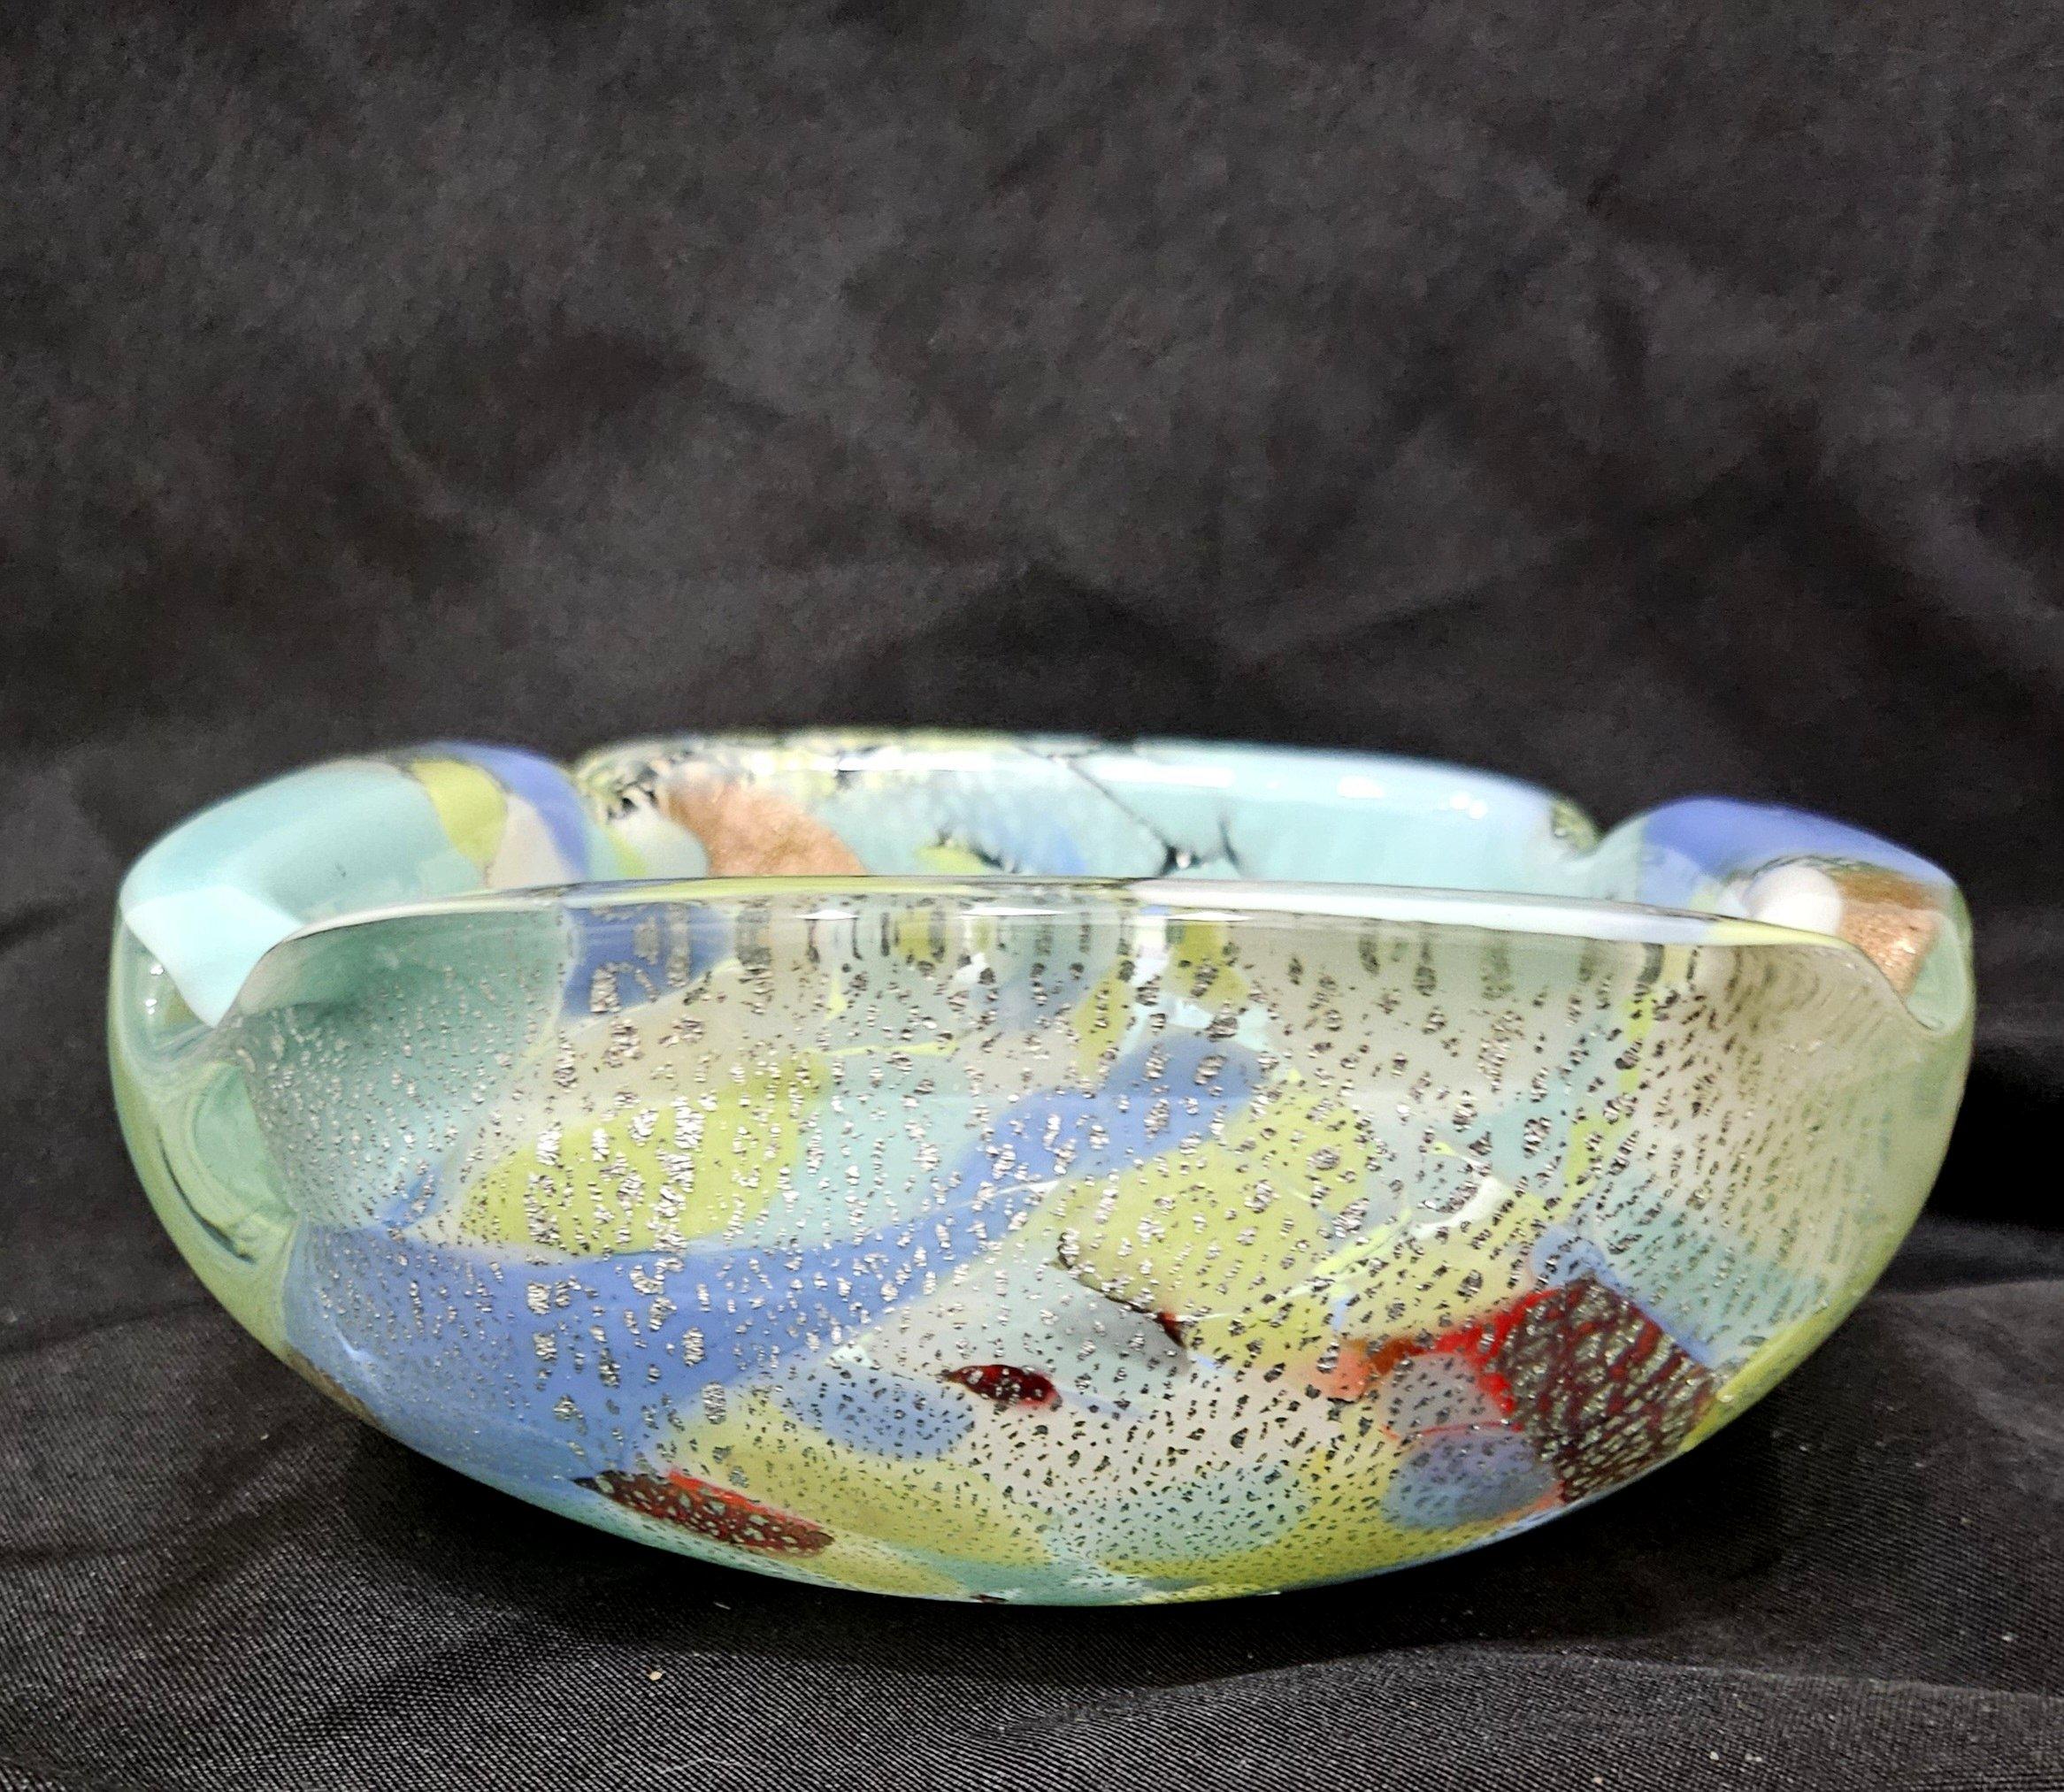 Murano Glass Ashtray / Bowl with Silver Fleck, A Macchie
Beautiful colors and patterns, a very special piece.  
Reminds us of Dino Martens but more likely could be AVeM.
Approximately 5.75 (across)  x 7 (point to point) x 2.5 (high) inches
Note: